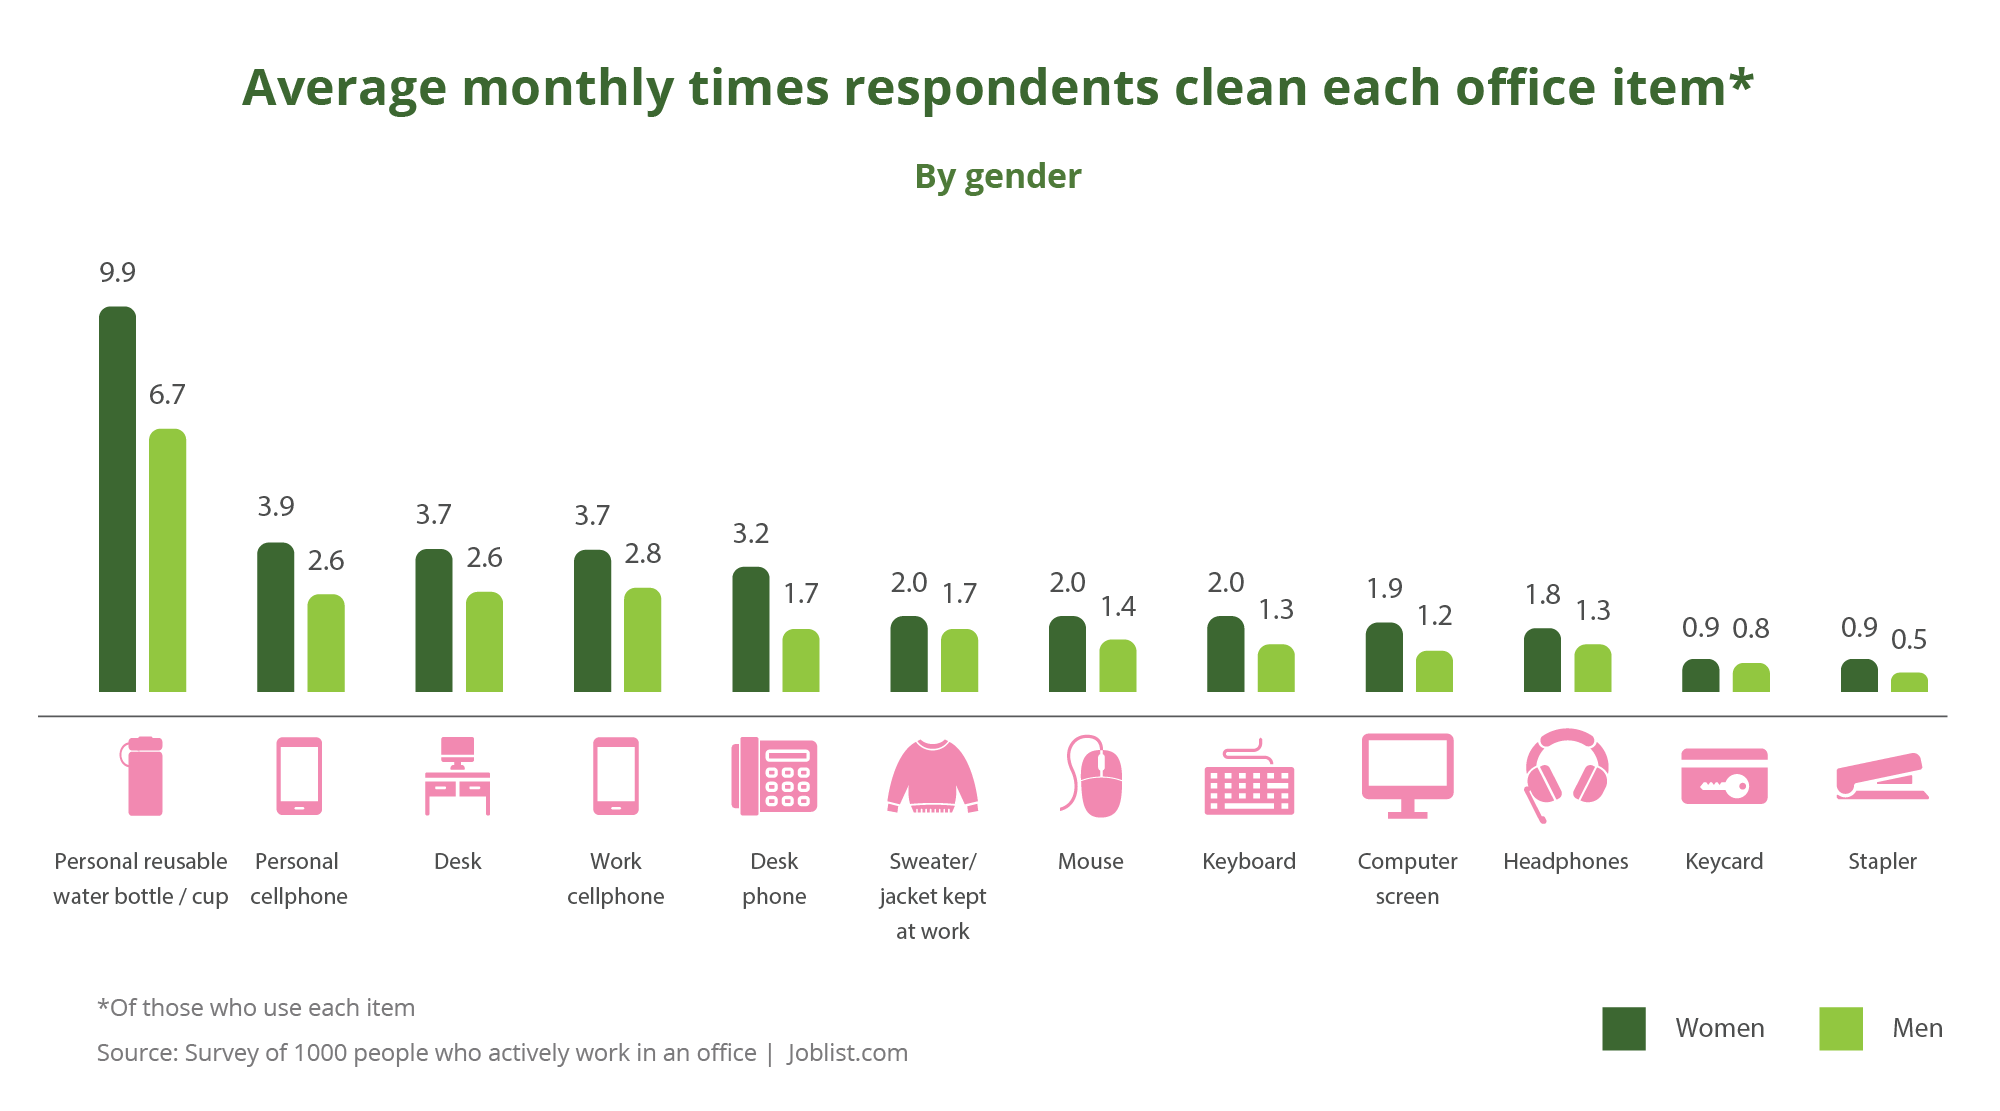 Average monthly times respondents clean each office item